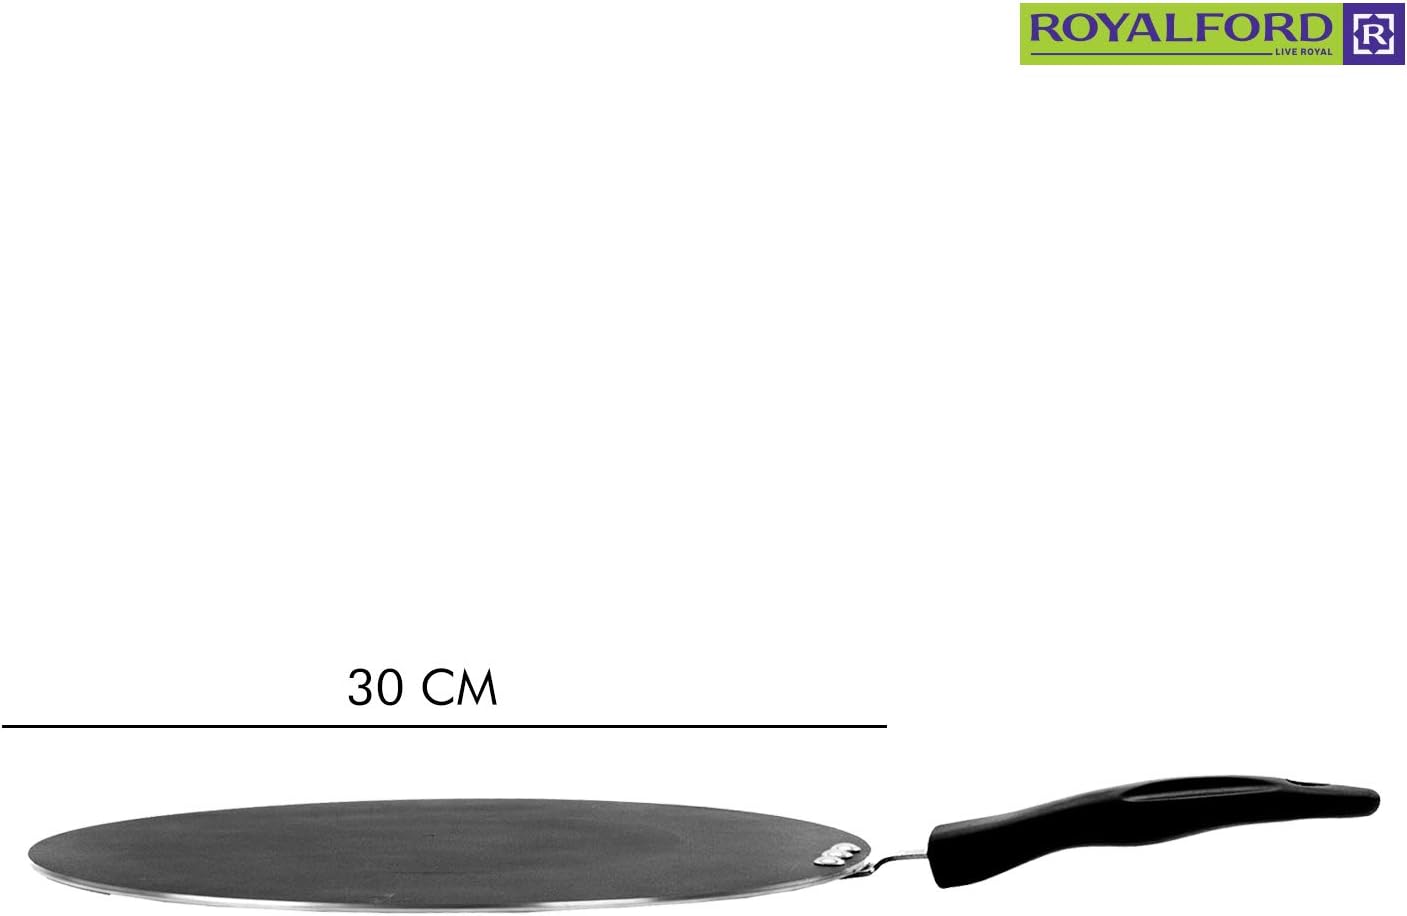 Royalford Rf2013-T30 30 cm Non Stick Tawa - Marble Coating Pan Suitable For Crepe Chapatti Pancakes Roti Dosa Flatbread Or Naan Bread - 3 Layer Non-Stick Surface | 1 Year Warranty, Black